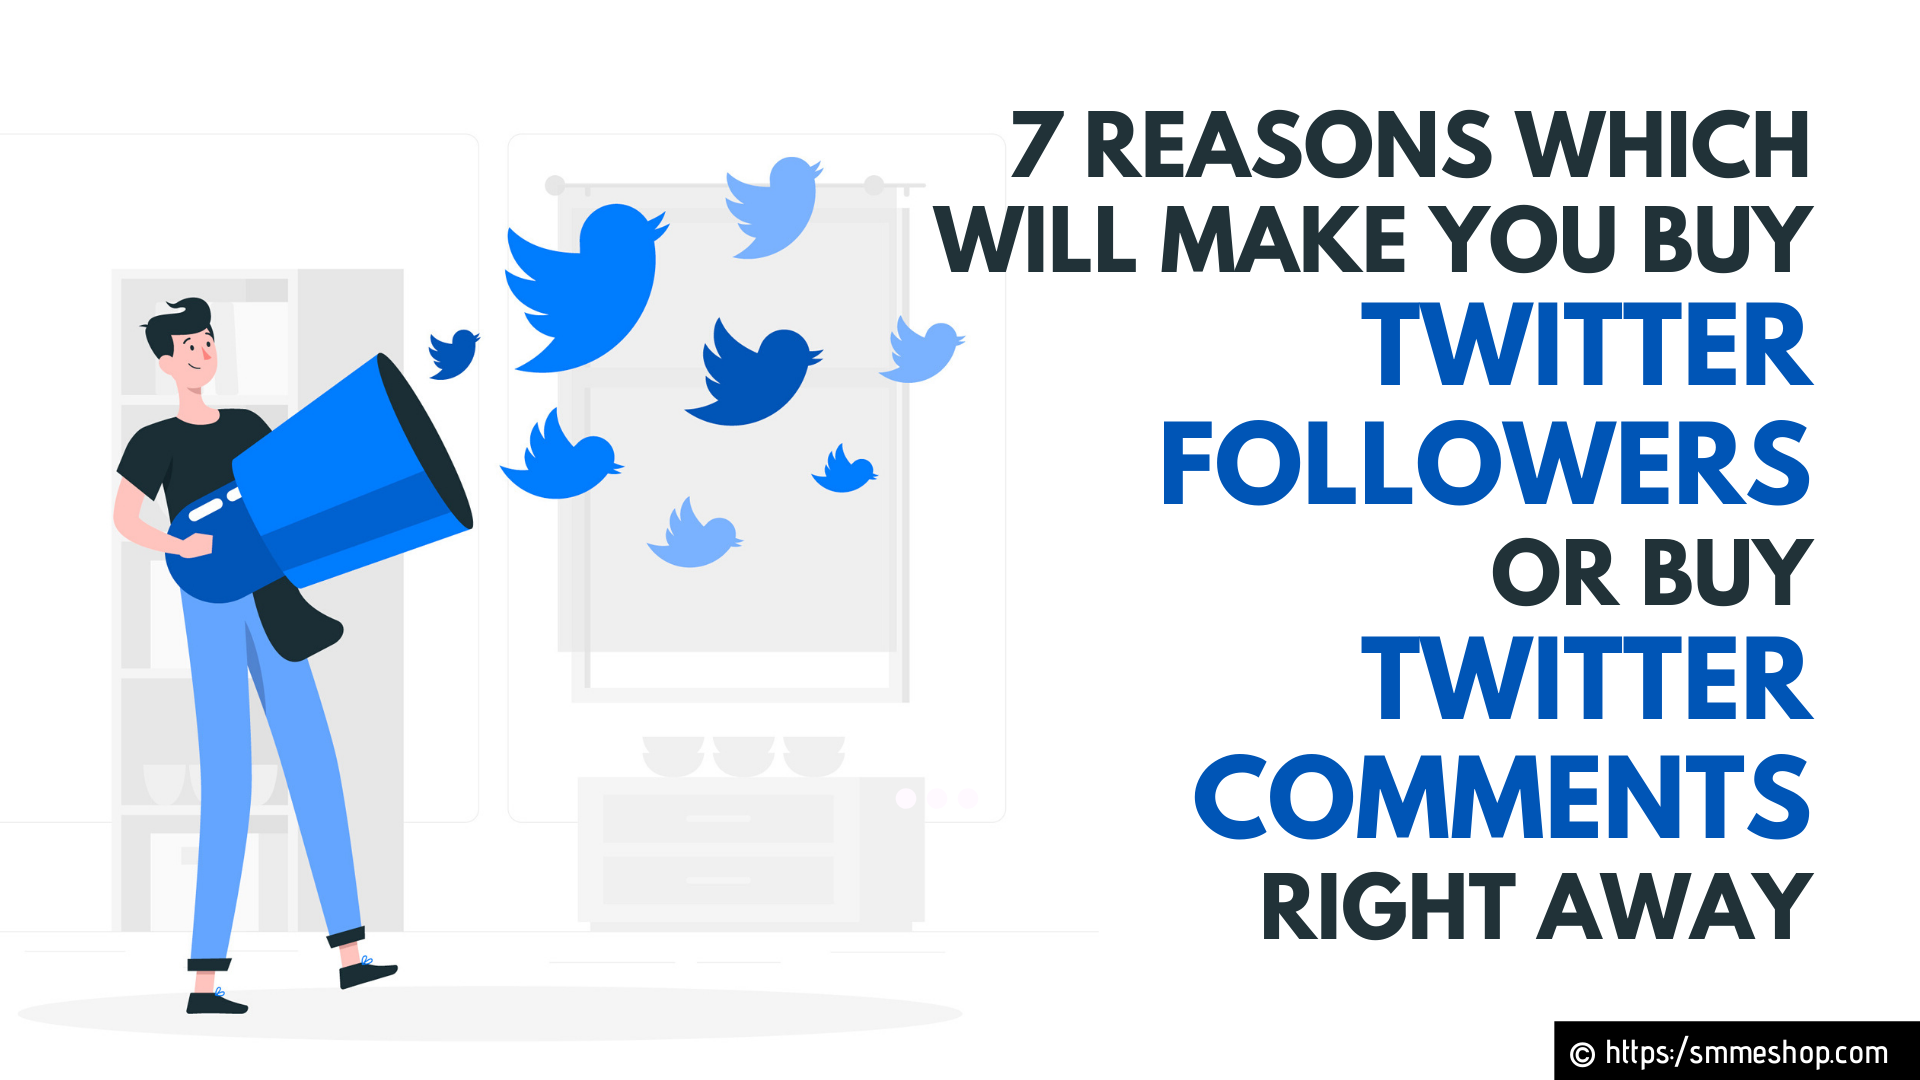 7 Reasons which will make you Buy Twitter Followers or Buy Twitter Comments Right Away